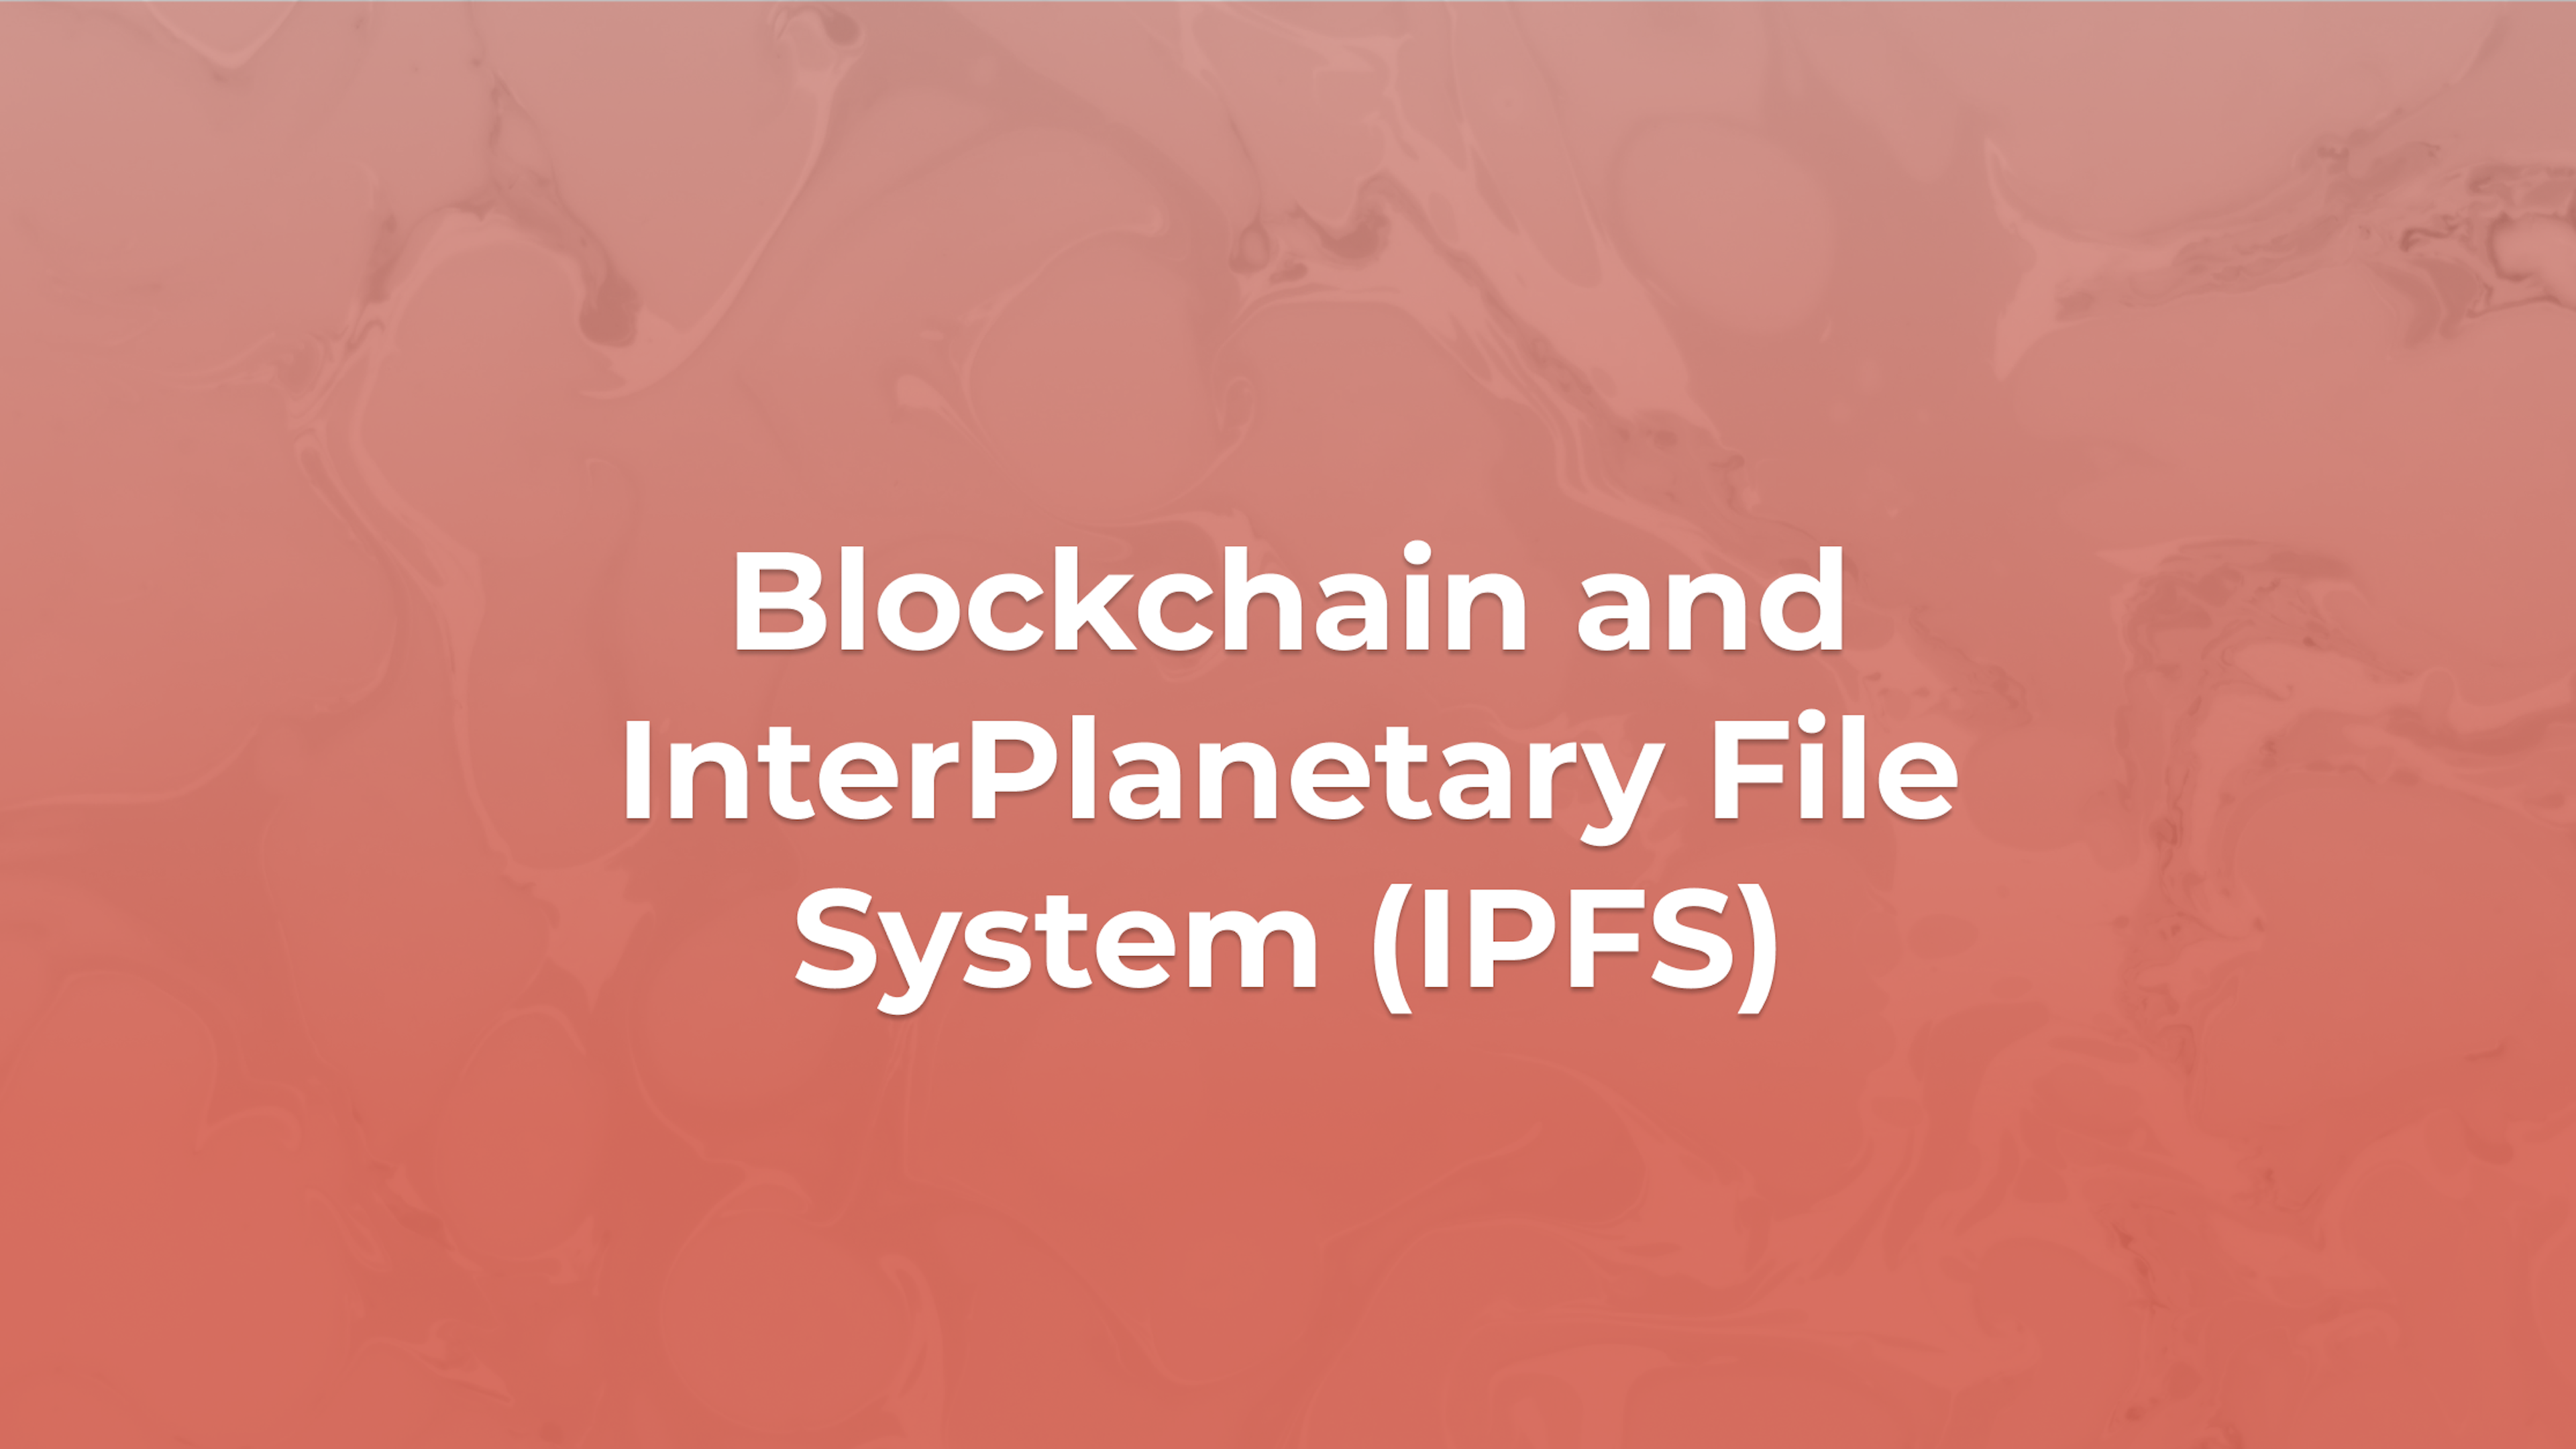 Blockchain and InterPlanetary File System (IPFS)